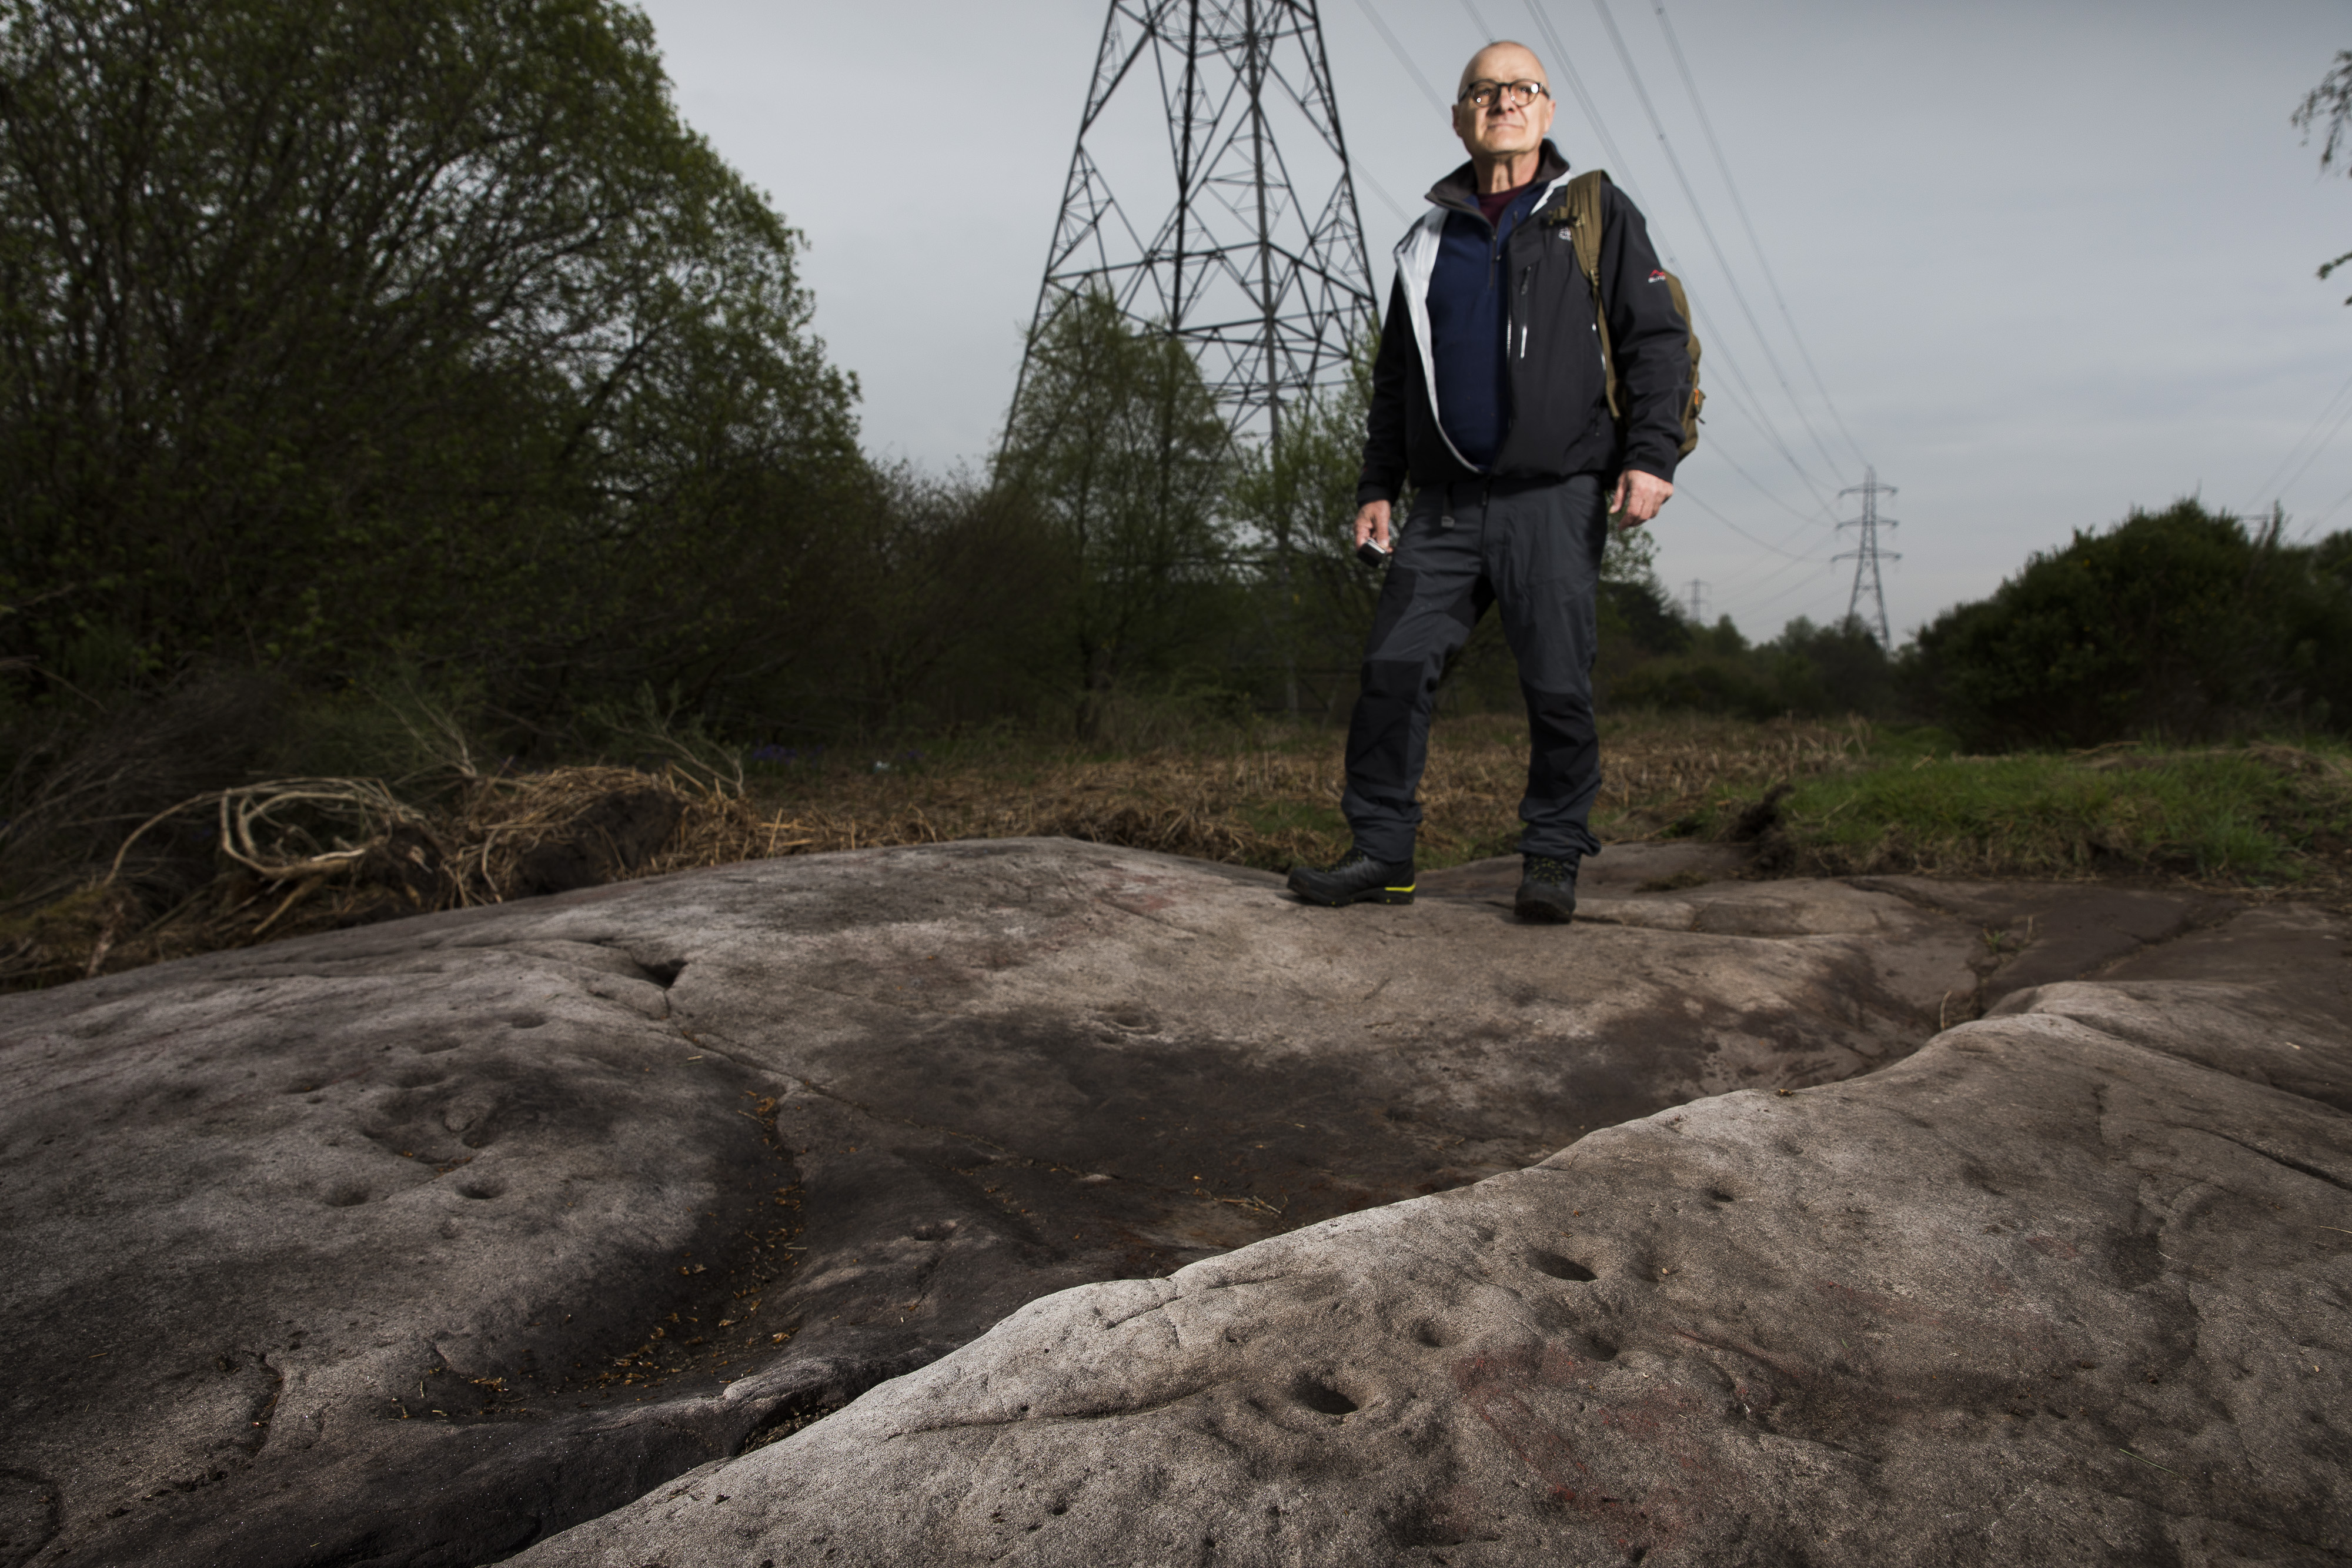 Gordon Morrison at the top of Waulking Mill Road in Faifley where there are some large rocks with cup and ring cravings possibly dating back to neolithic times…..